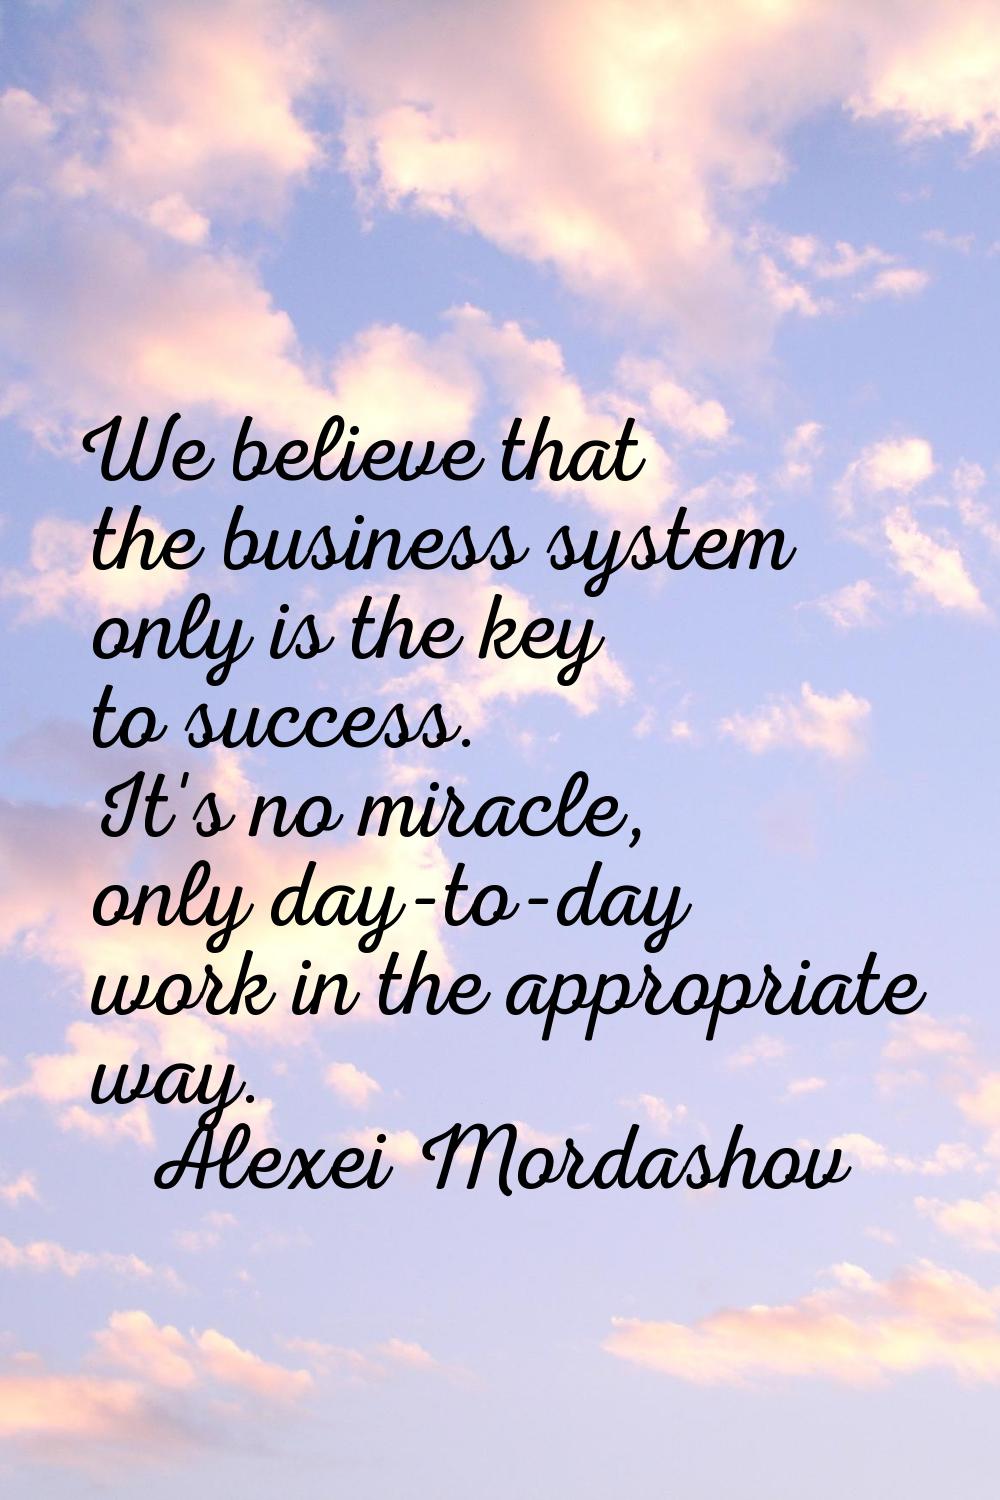 We believe that the business system only is the key to success. It's no miracle, only day-to-day wo